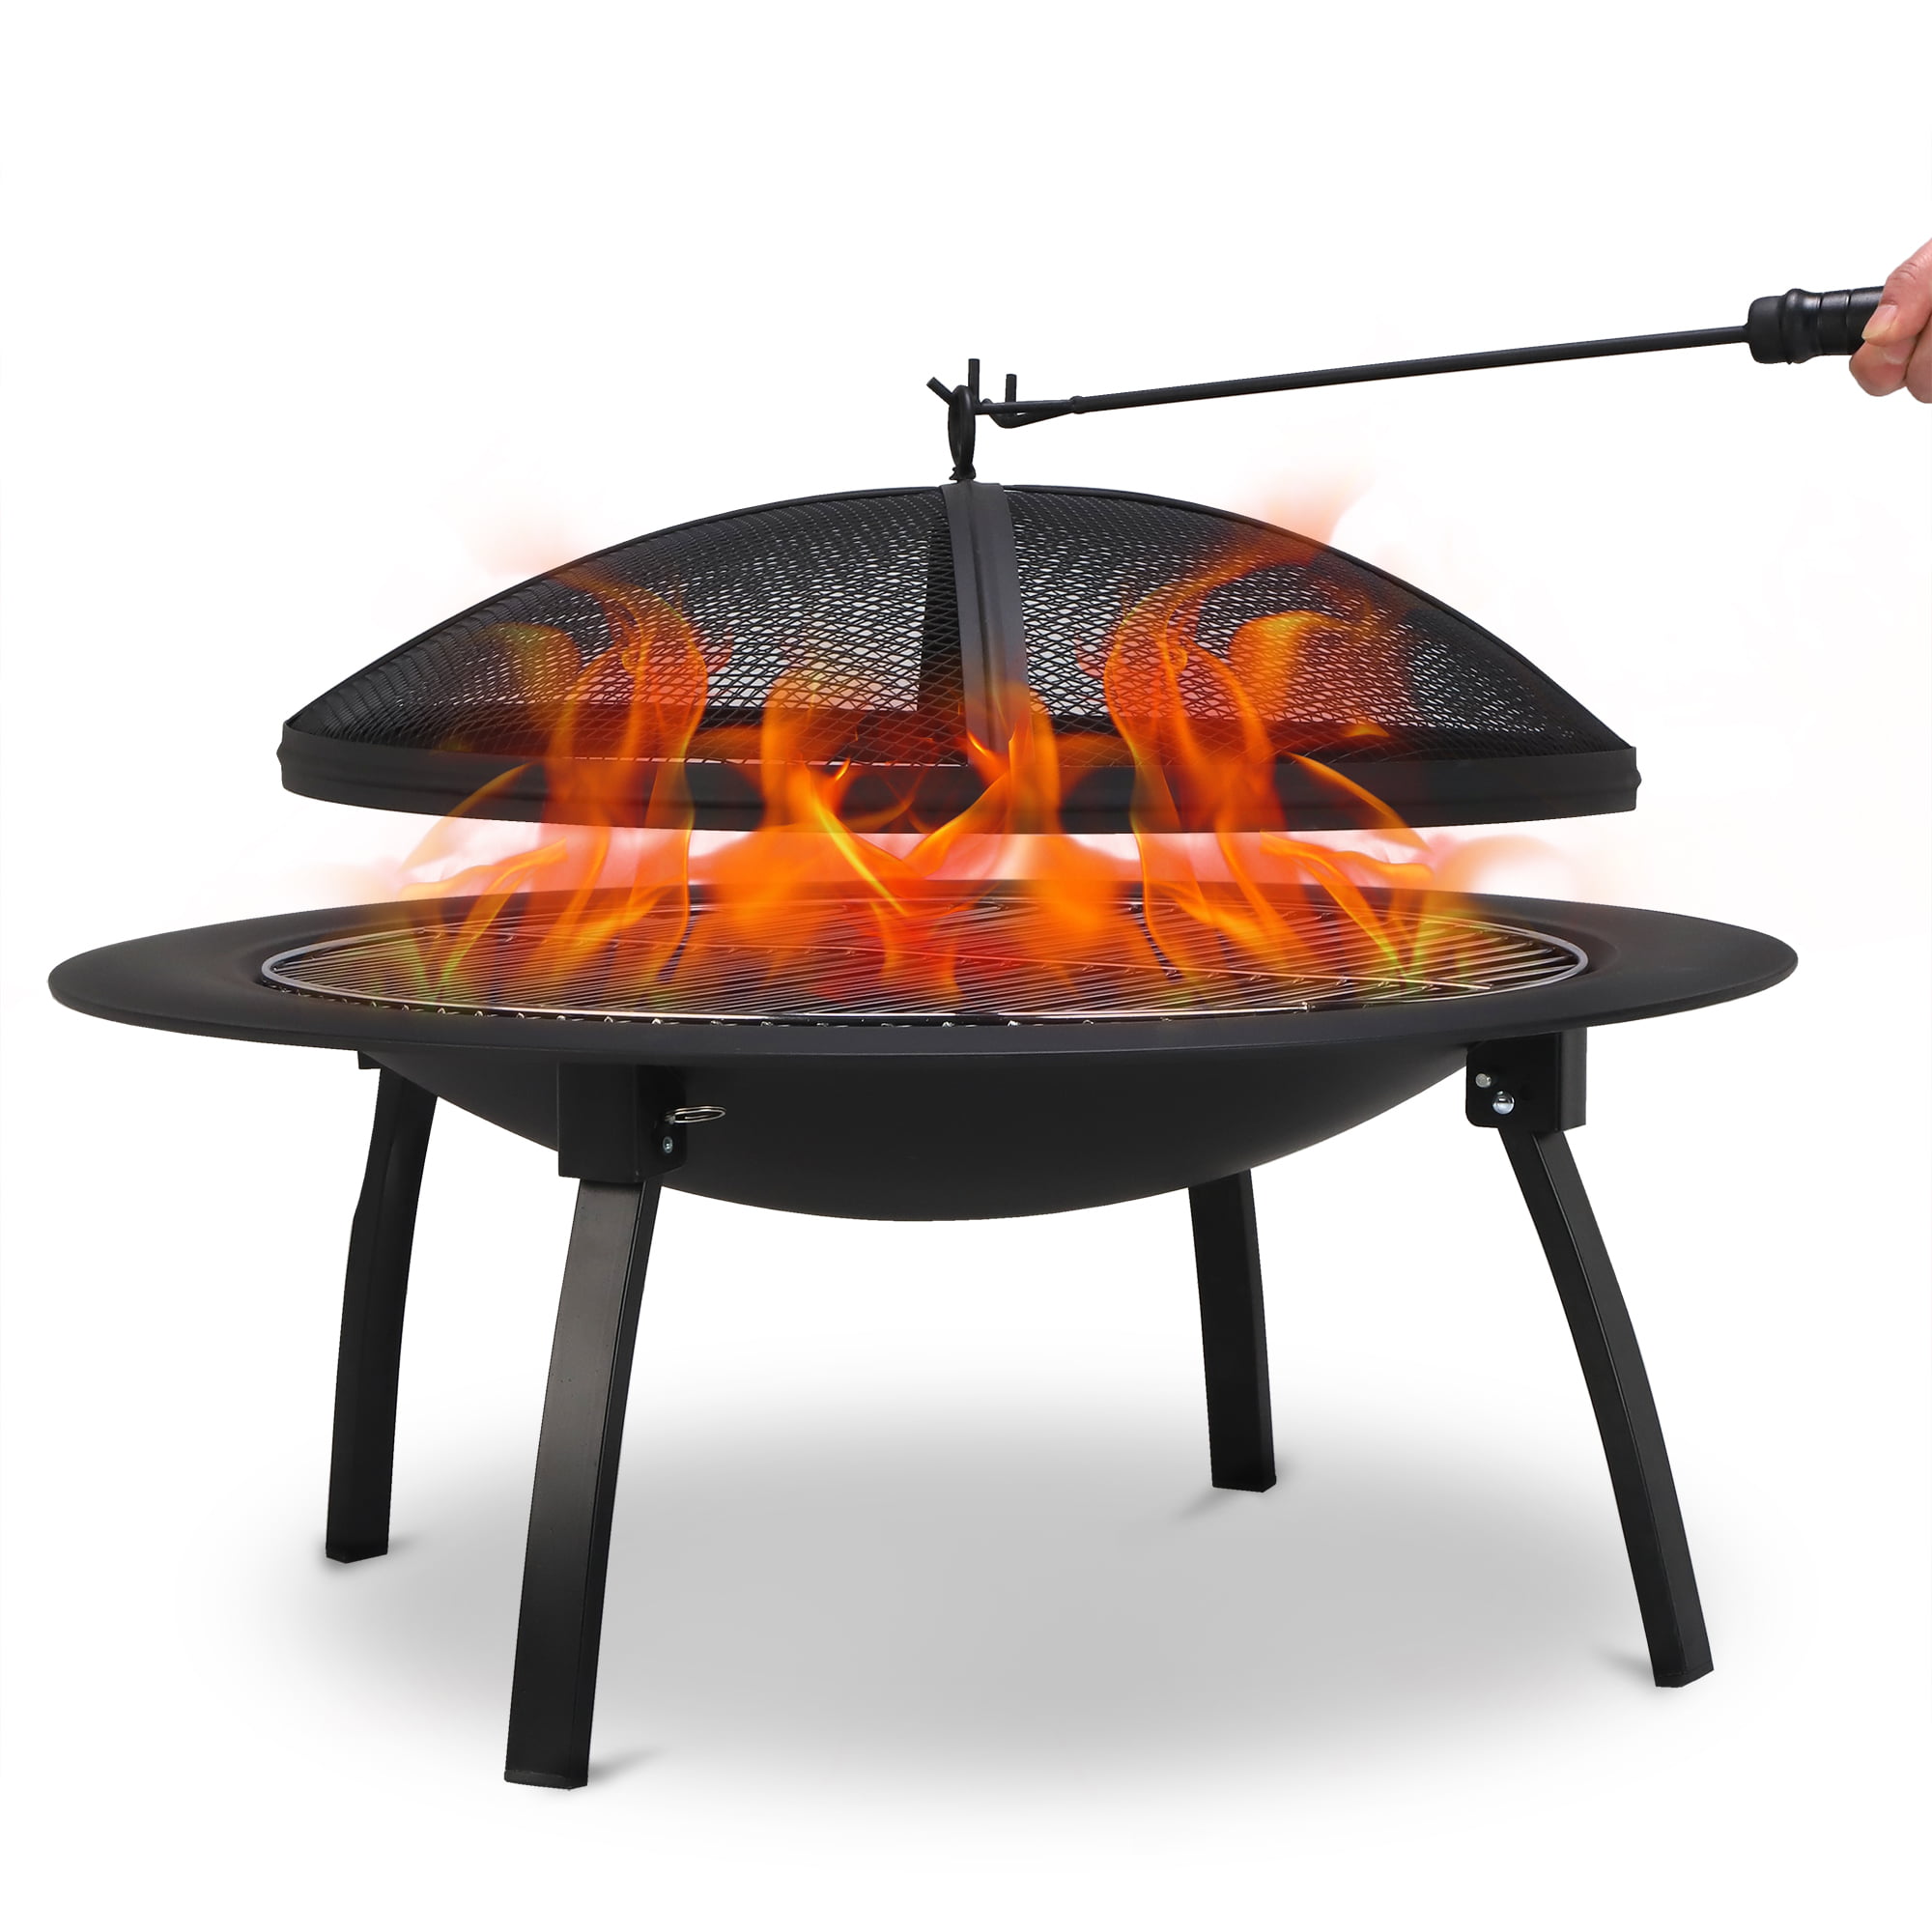 Details about   22"Four Feet Fire Pit Wood Burning Backyard Poolside Iron Brazier Outdoor Heater 